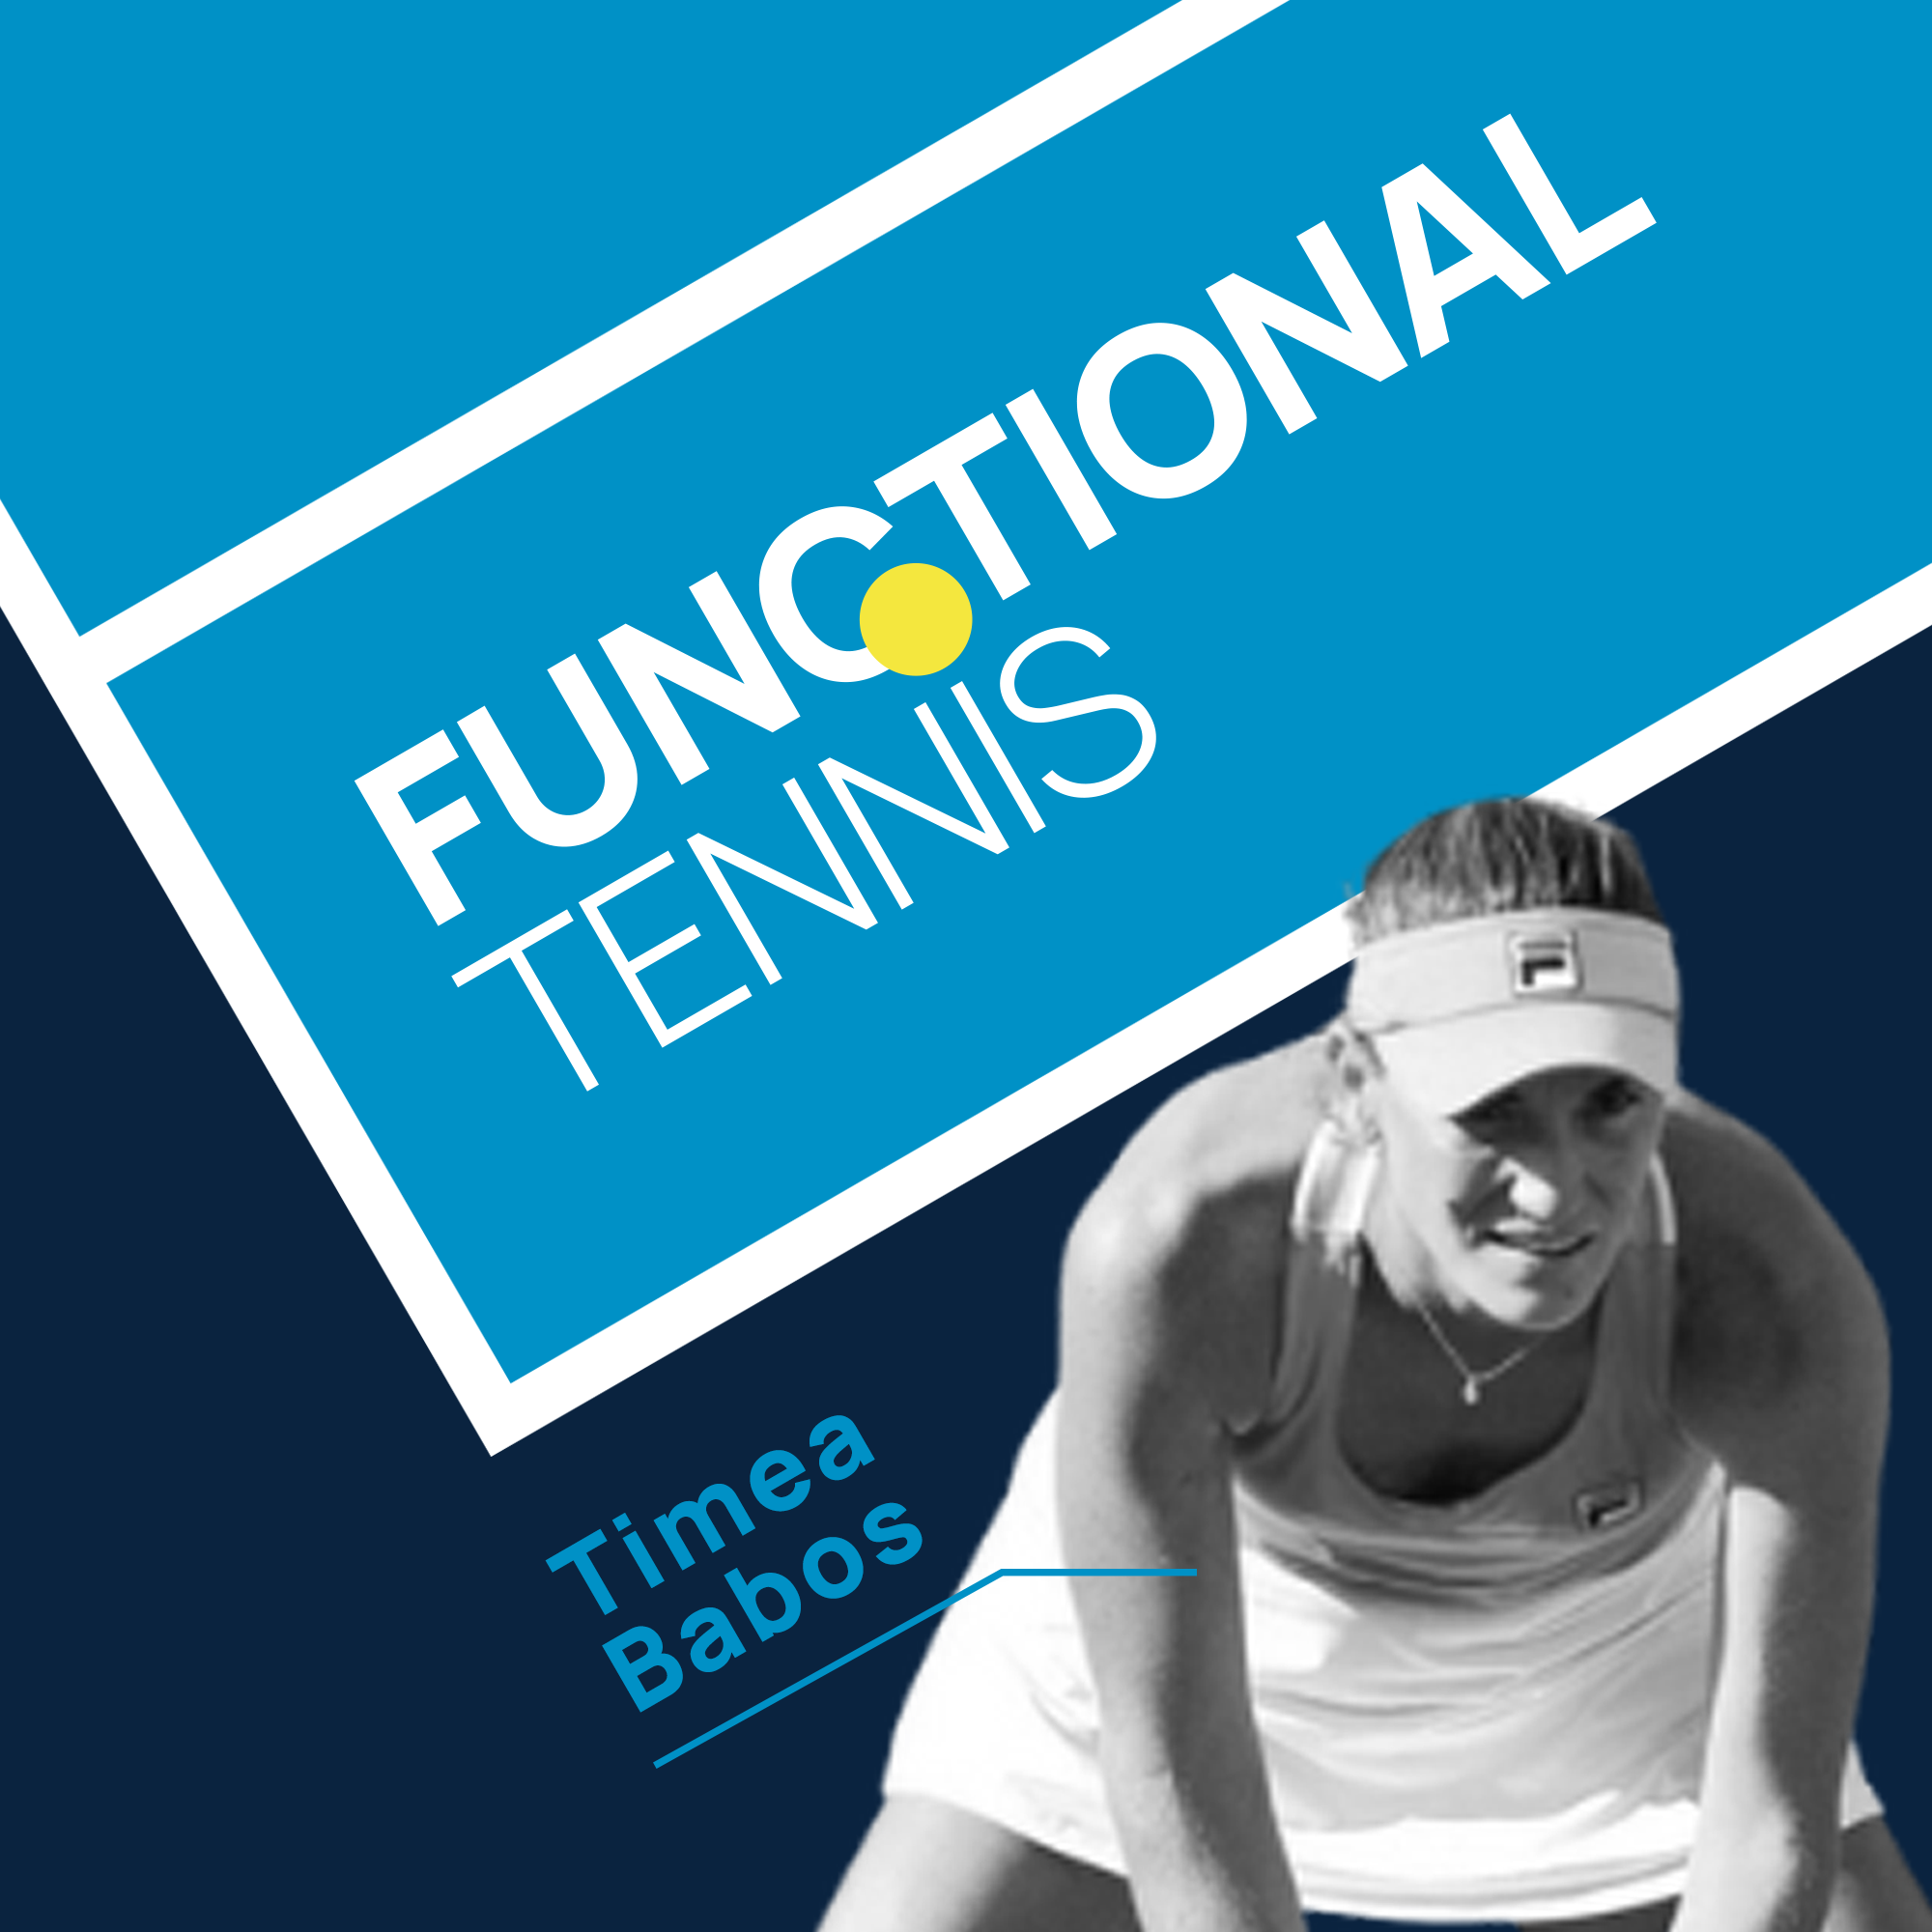 The gruelling journey to 4 Grand Slam titles - Timea Babos [Ep.202]